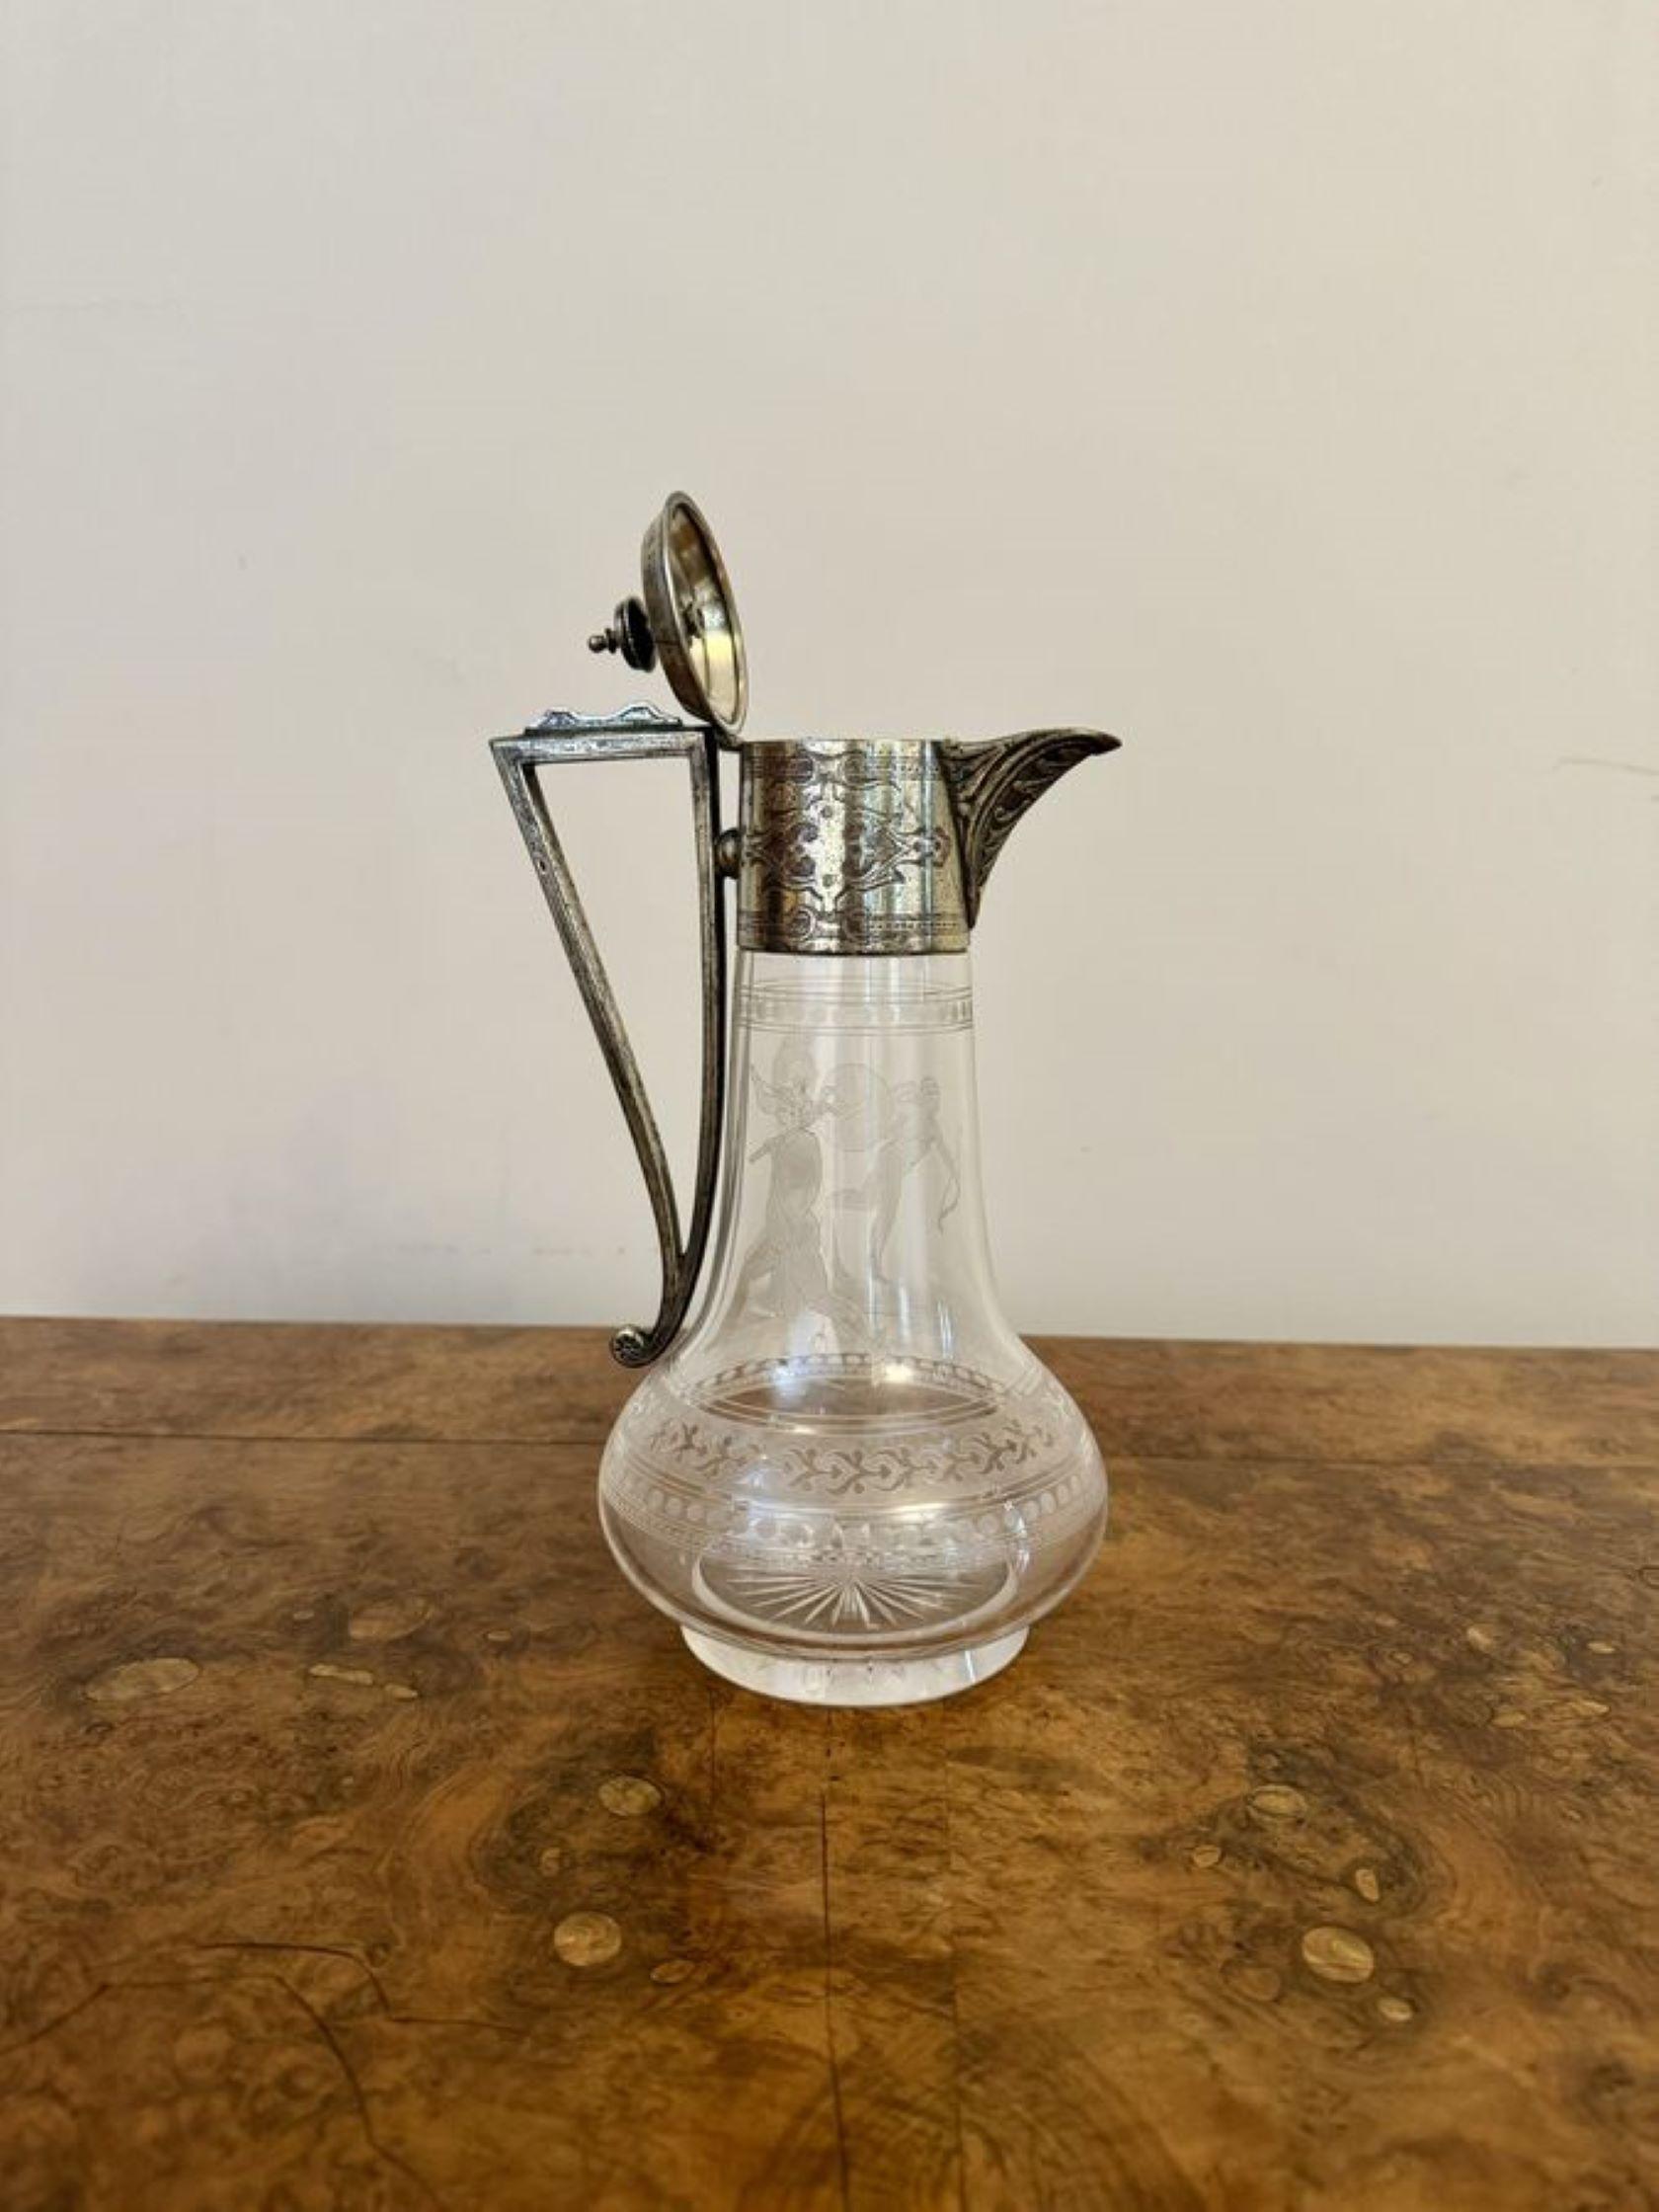 Outstanding quality antique Victorian silver plated claret jug by John Northwood In Good Condition For Sale In Ipswich, GB